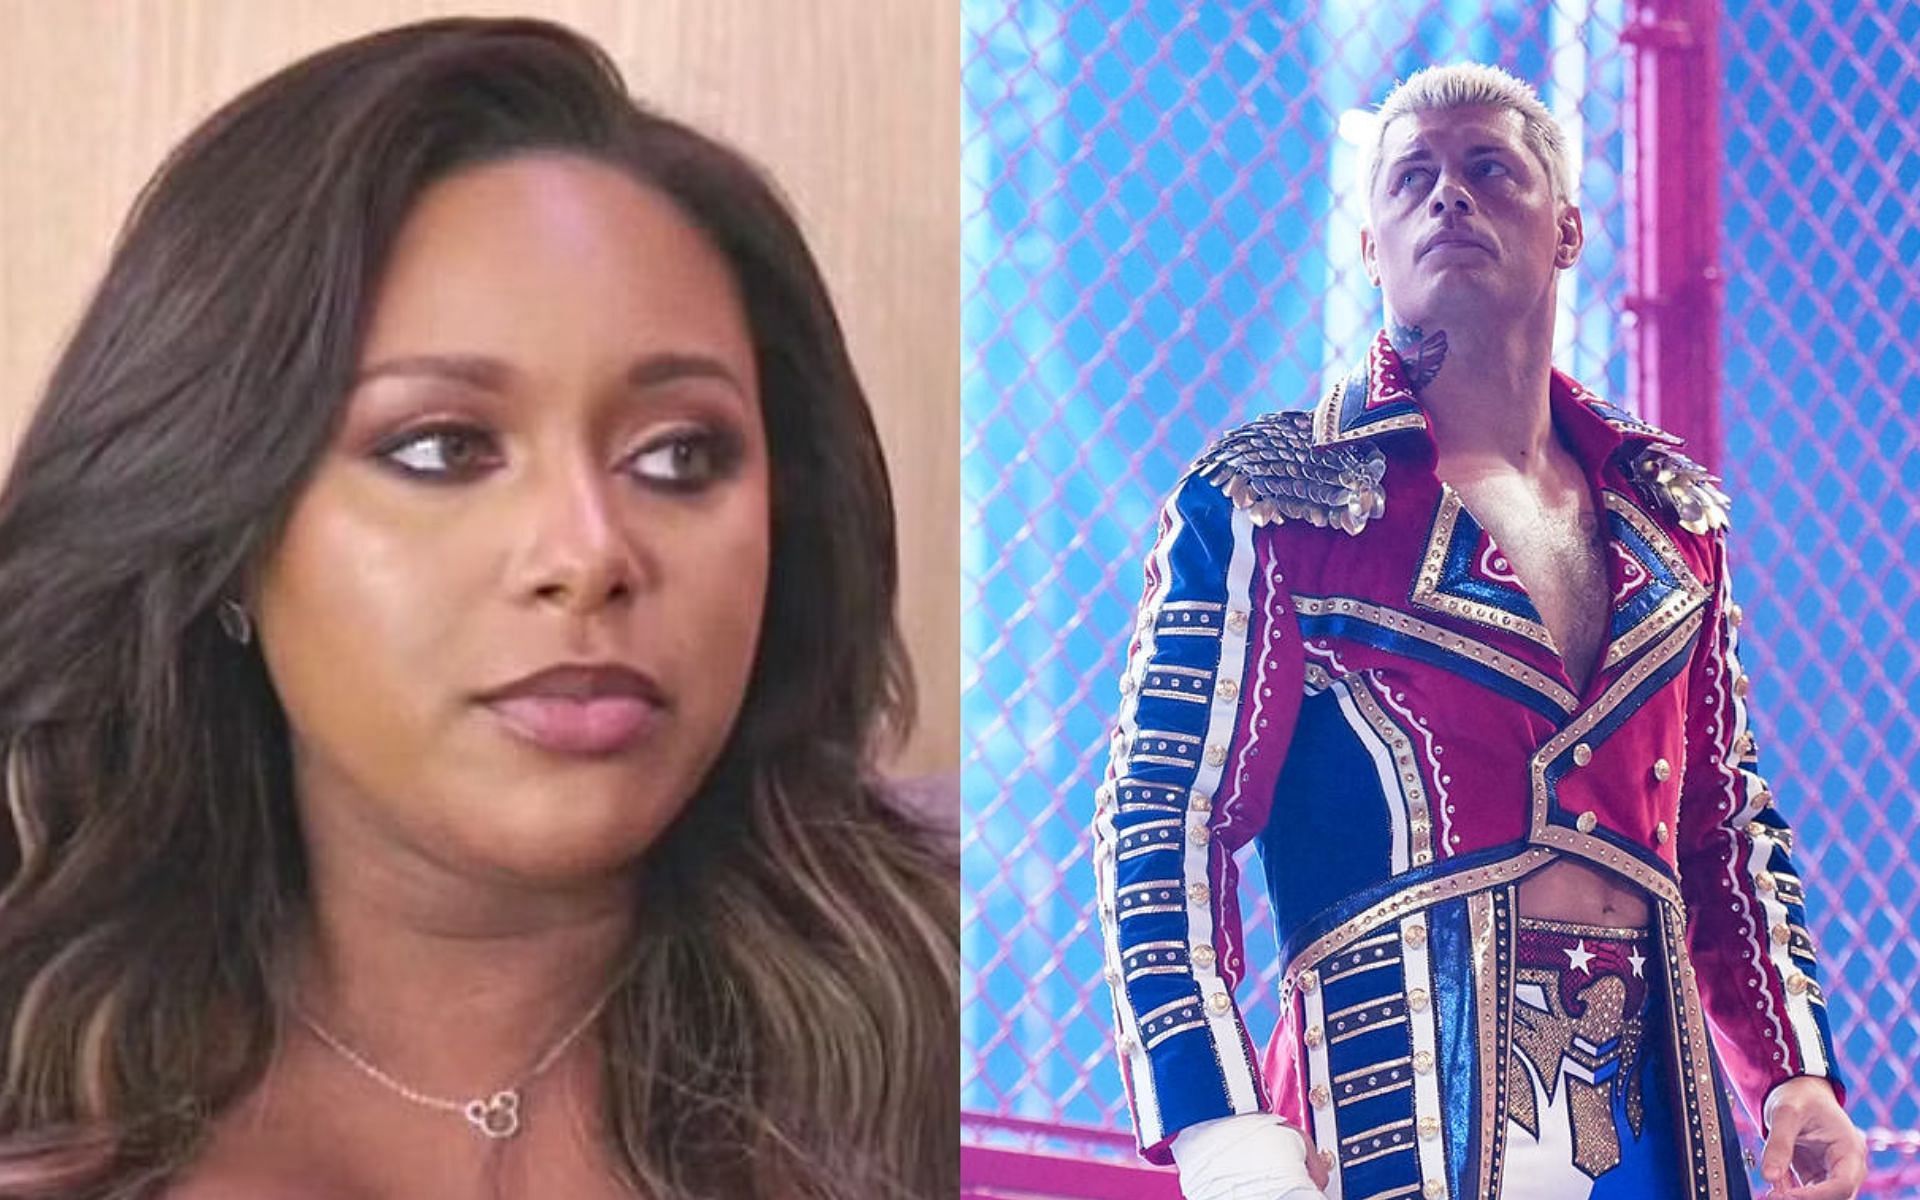 Cody and Brandi Rhodes have been married since 2013.